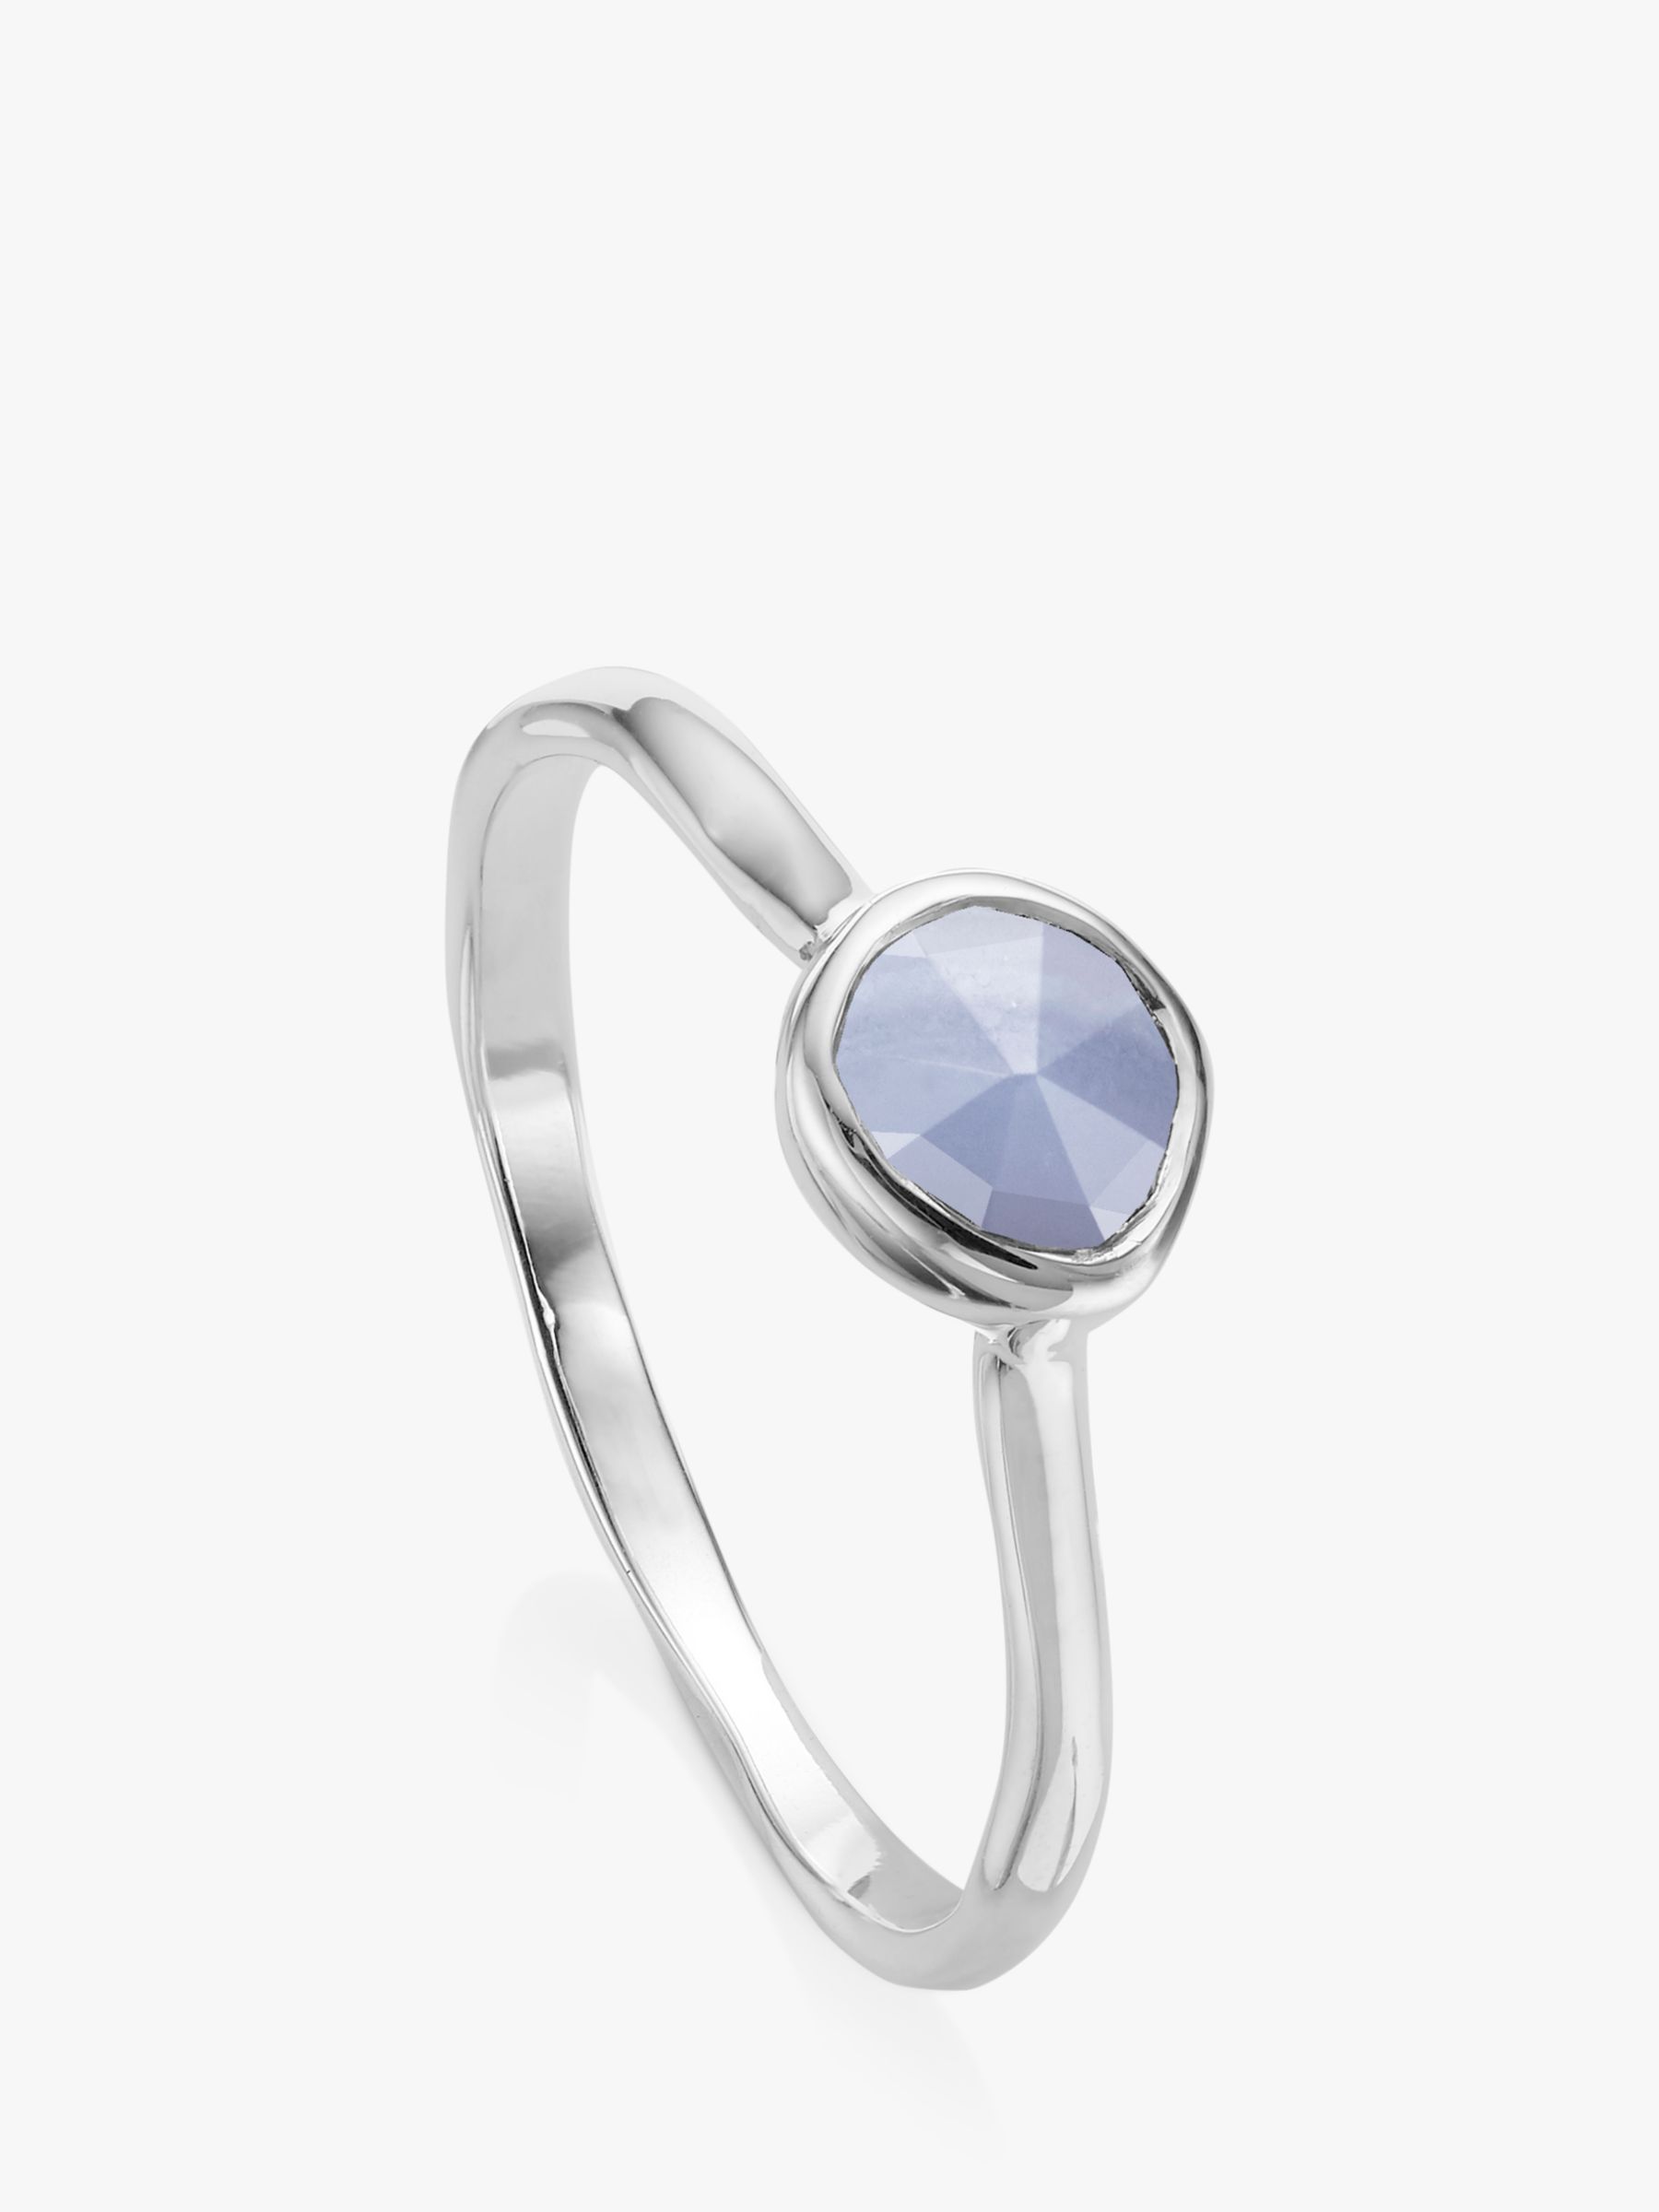 Buy Monica Vinader Small Siren Blue Lace Agate Stacking Ring, Silver Online at johnlewis.com